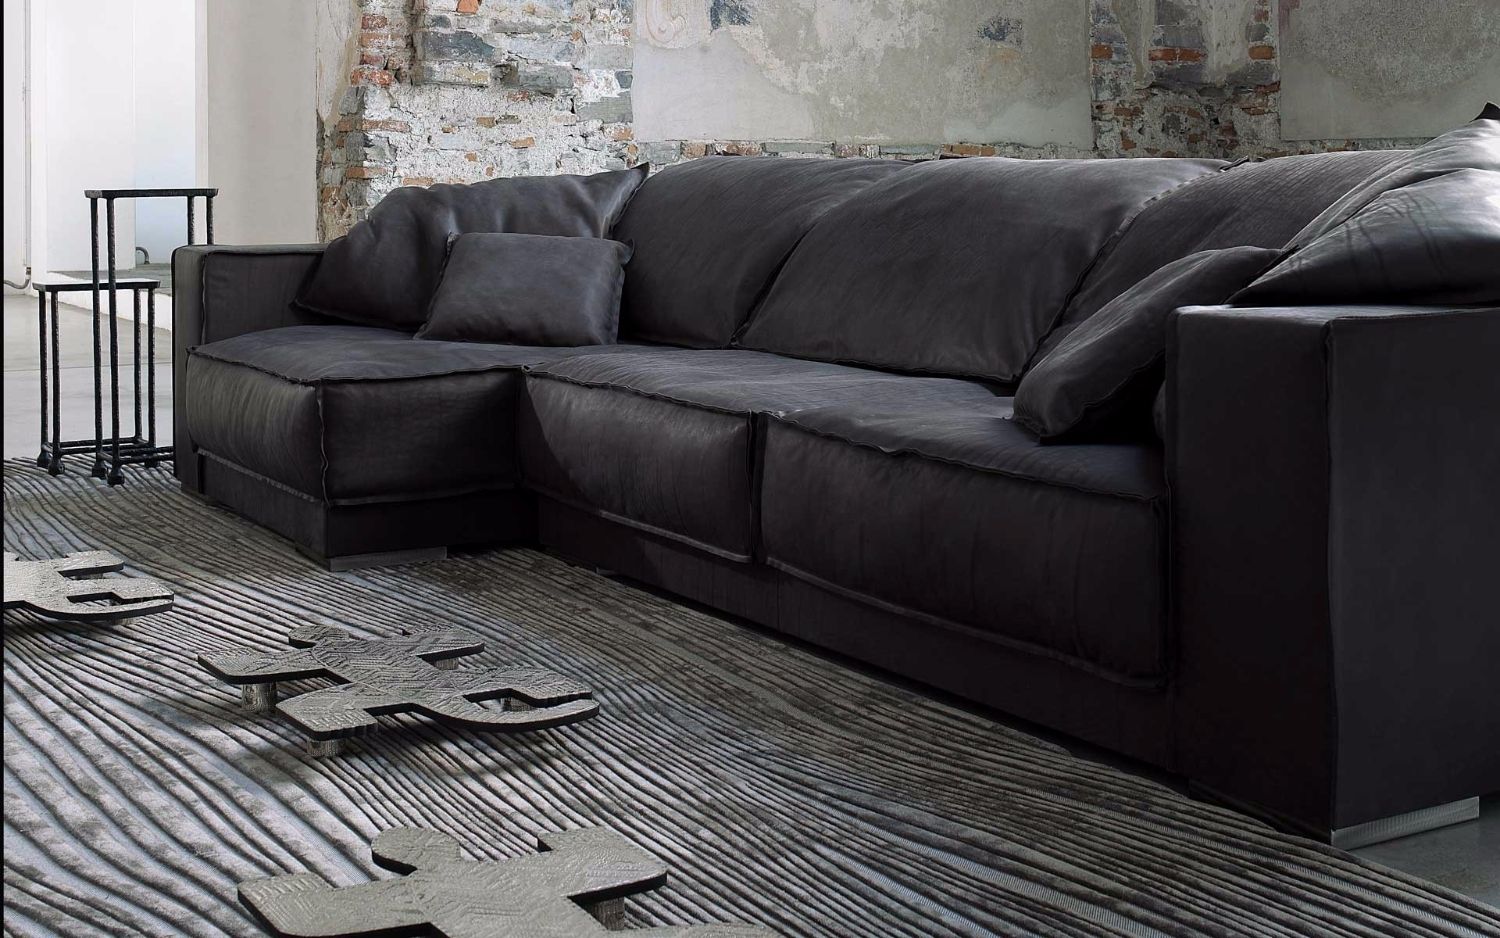 Budapest Soft Sofa Baxter – Armchairs And Sofas For Soft Sofas (Photo 1 of 10)